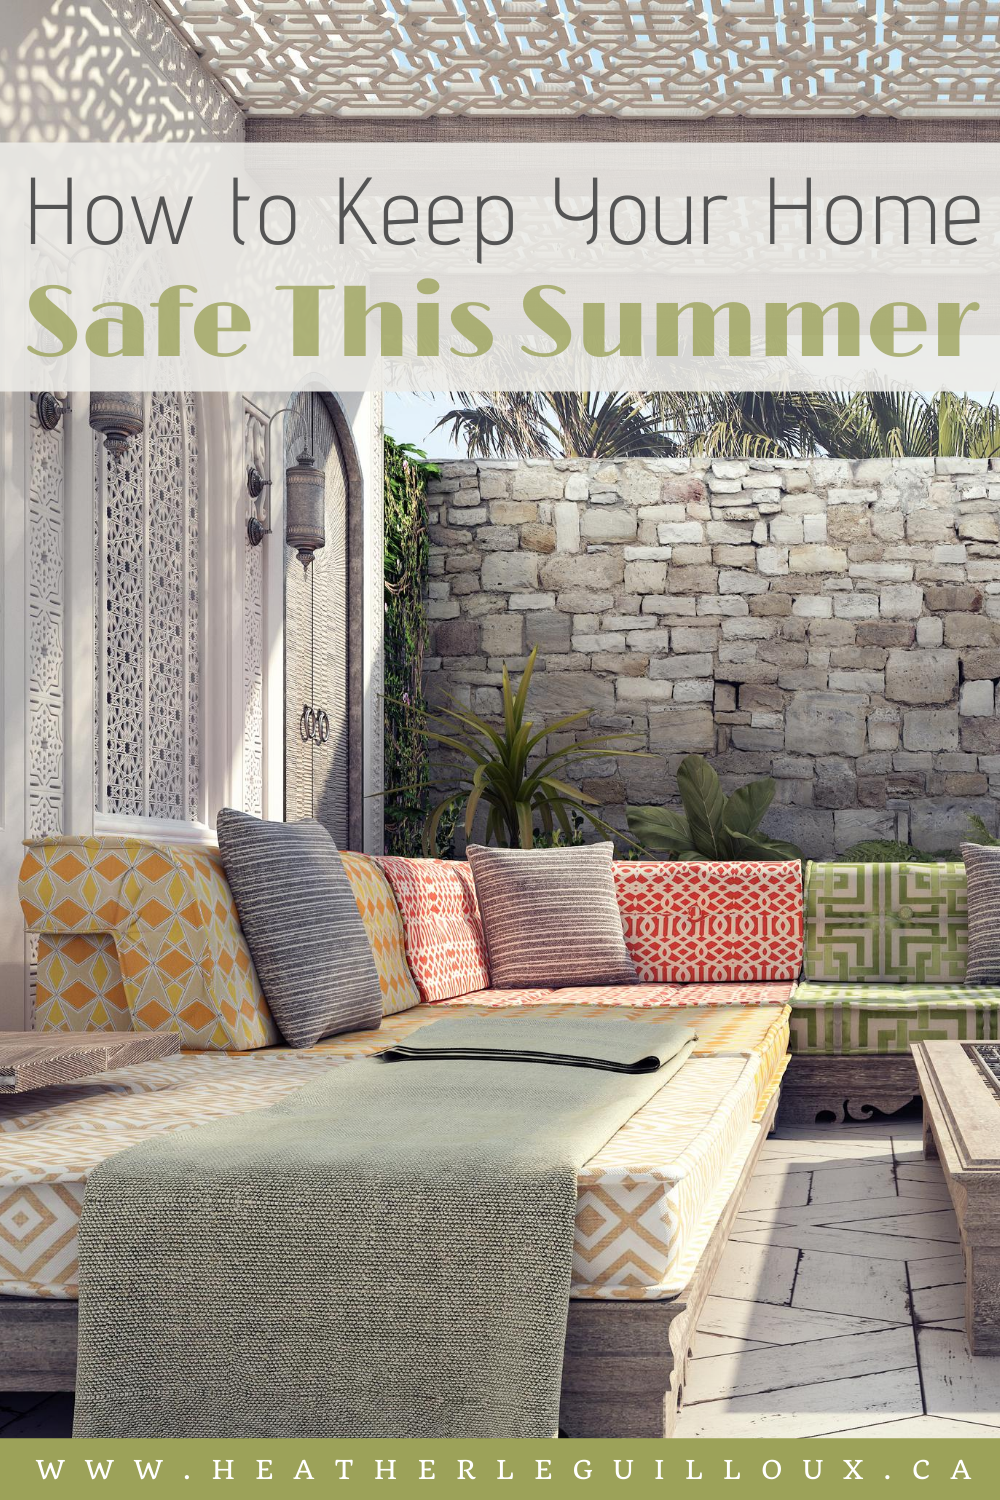 Although physical distancing measures appear to be easing for the time being, and with them the “stay indoors” slogan that’s predominated the last few months, chances are you’ll be spending more time inside than a normal summer. That doesn’t mean you should let your guard down, though. While in past summers, homeowners have had to protect their homes while they vacationed abroad, this summer you need to make sure your home is safe while you’re outside and while you’re inside. #home #security